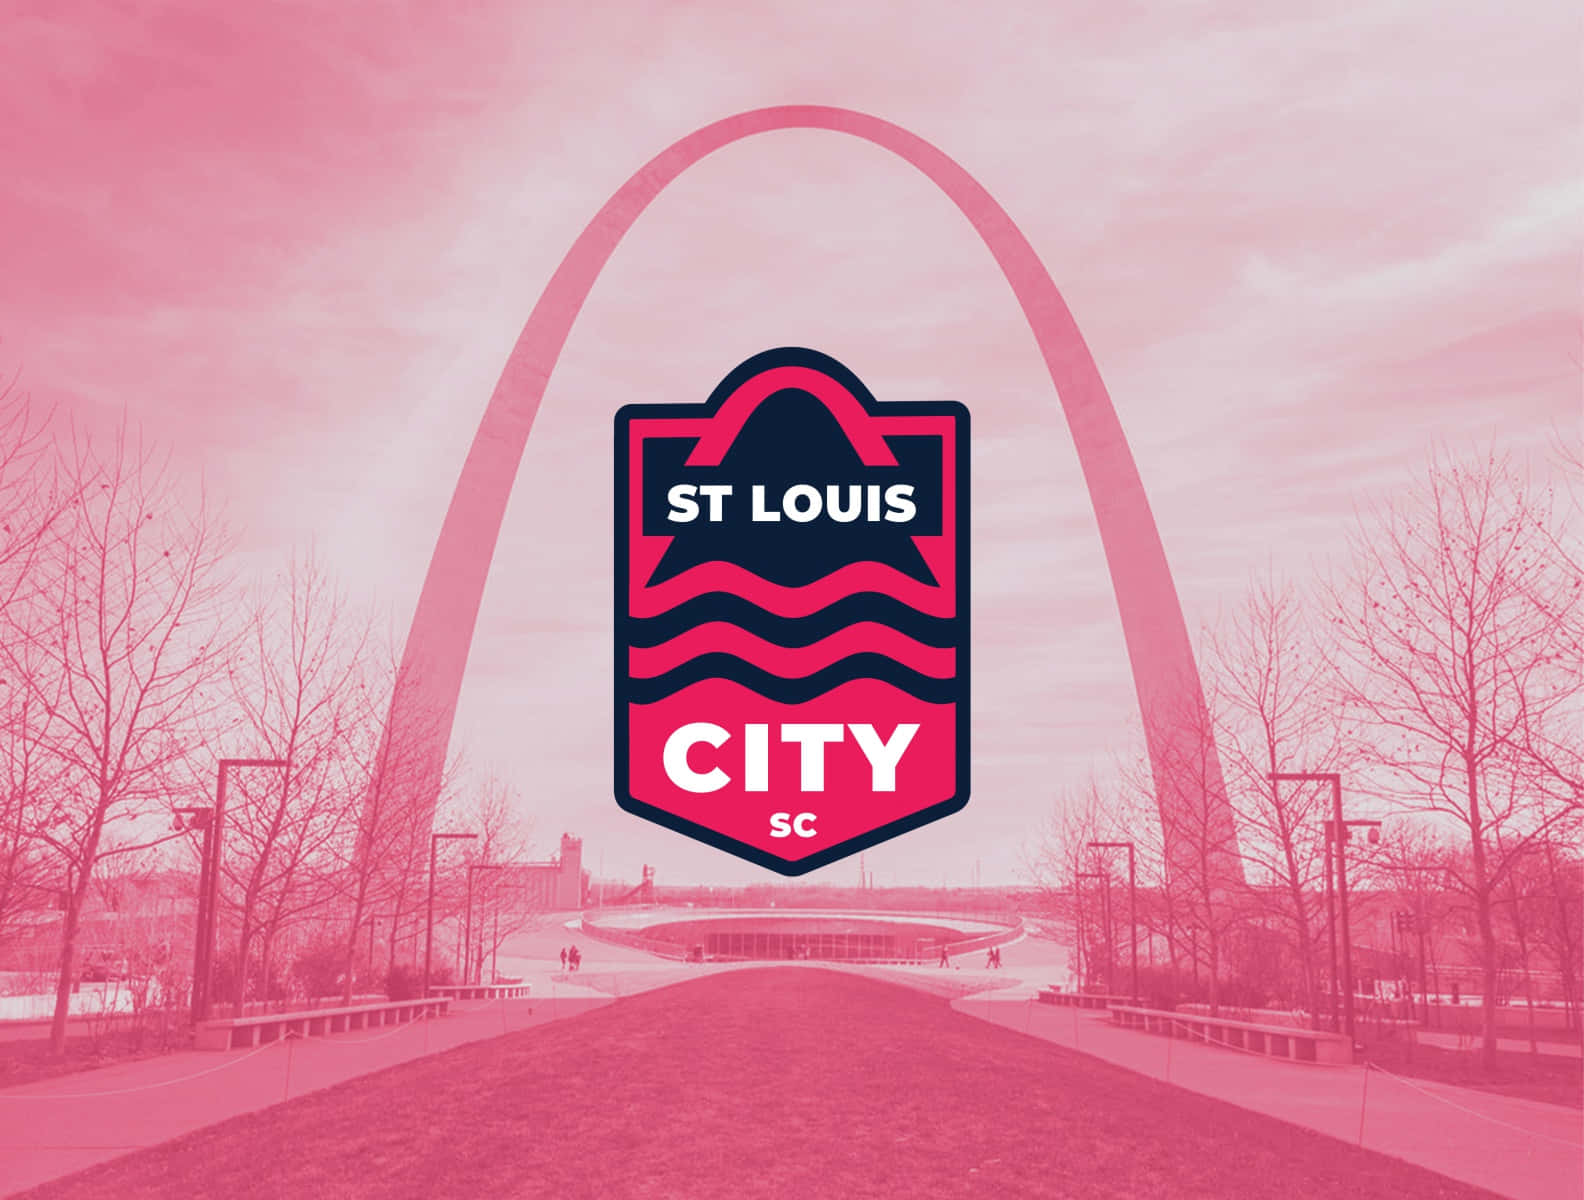 Download St. Louis City Sc Logo With Other Football Clubs Wallpaper